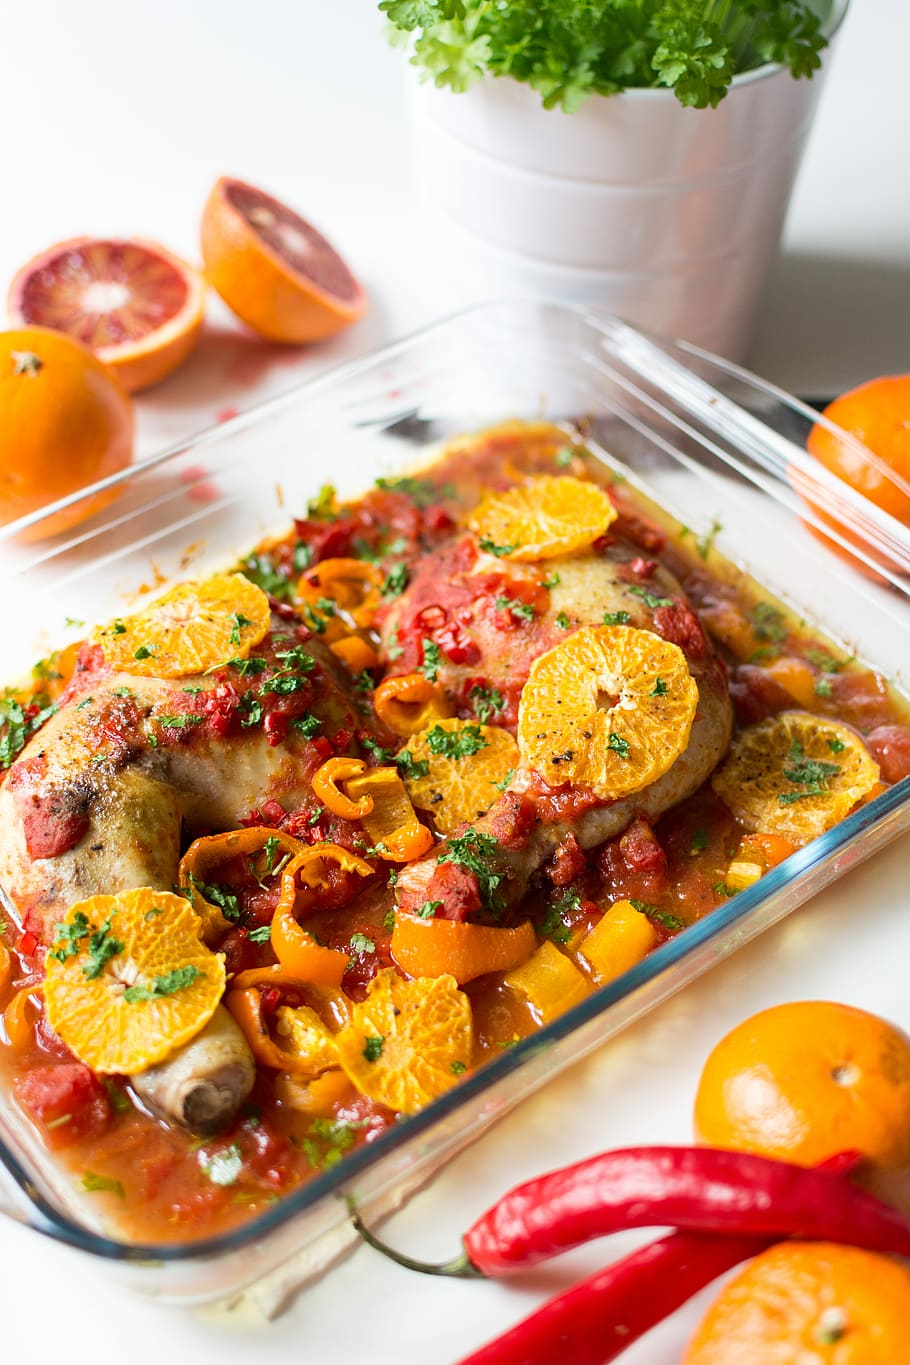 tomatoes, peppers, oranges, Chicken legs, chicken, close up, healthy, meat, orange, paleo